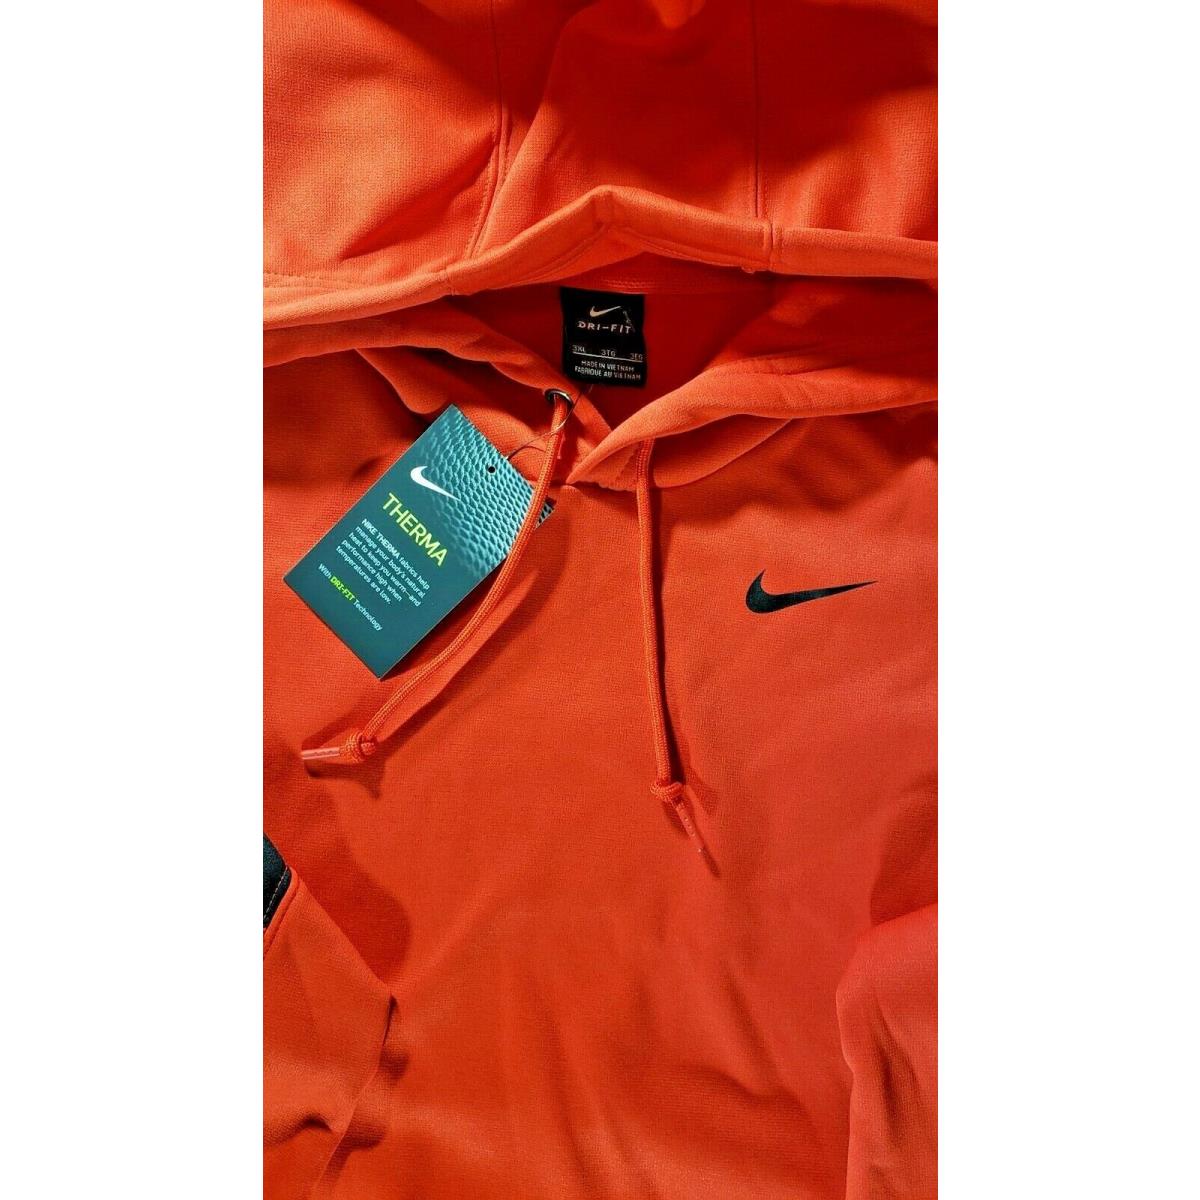 Nike clothing  - Red , university red Manufacturer 0